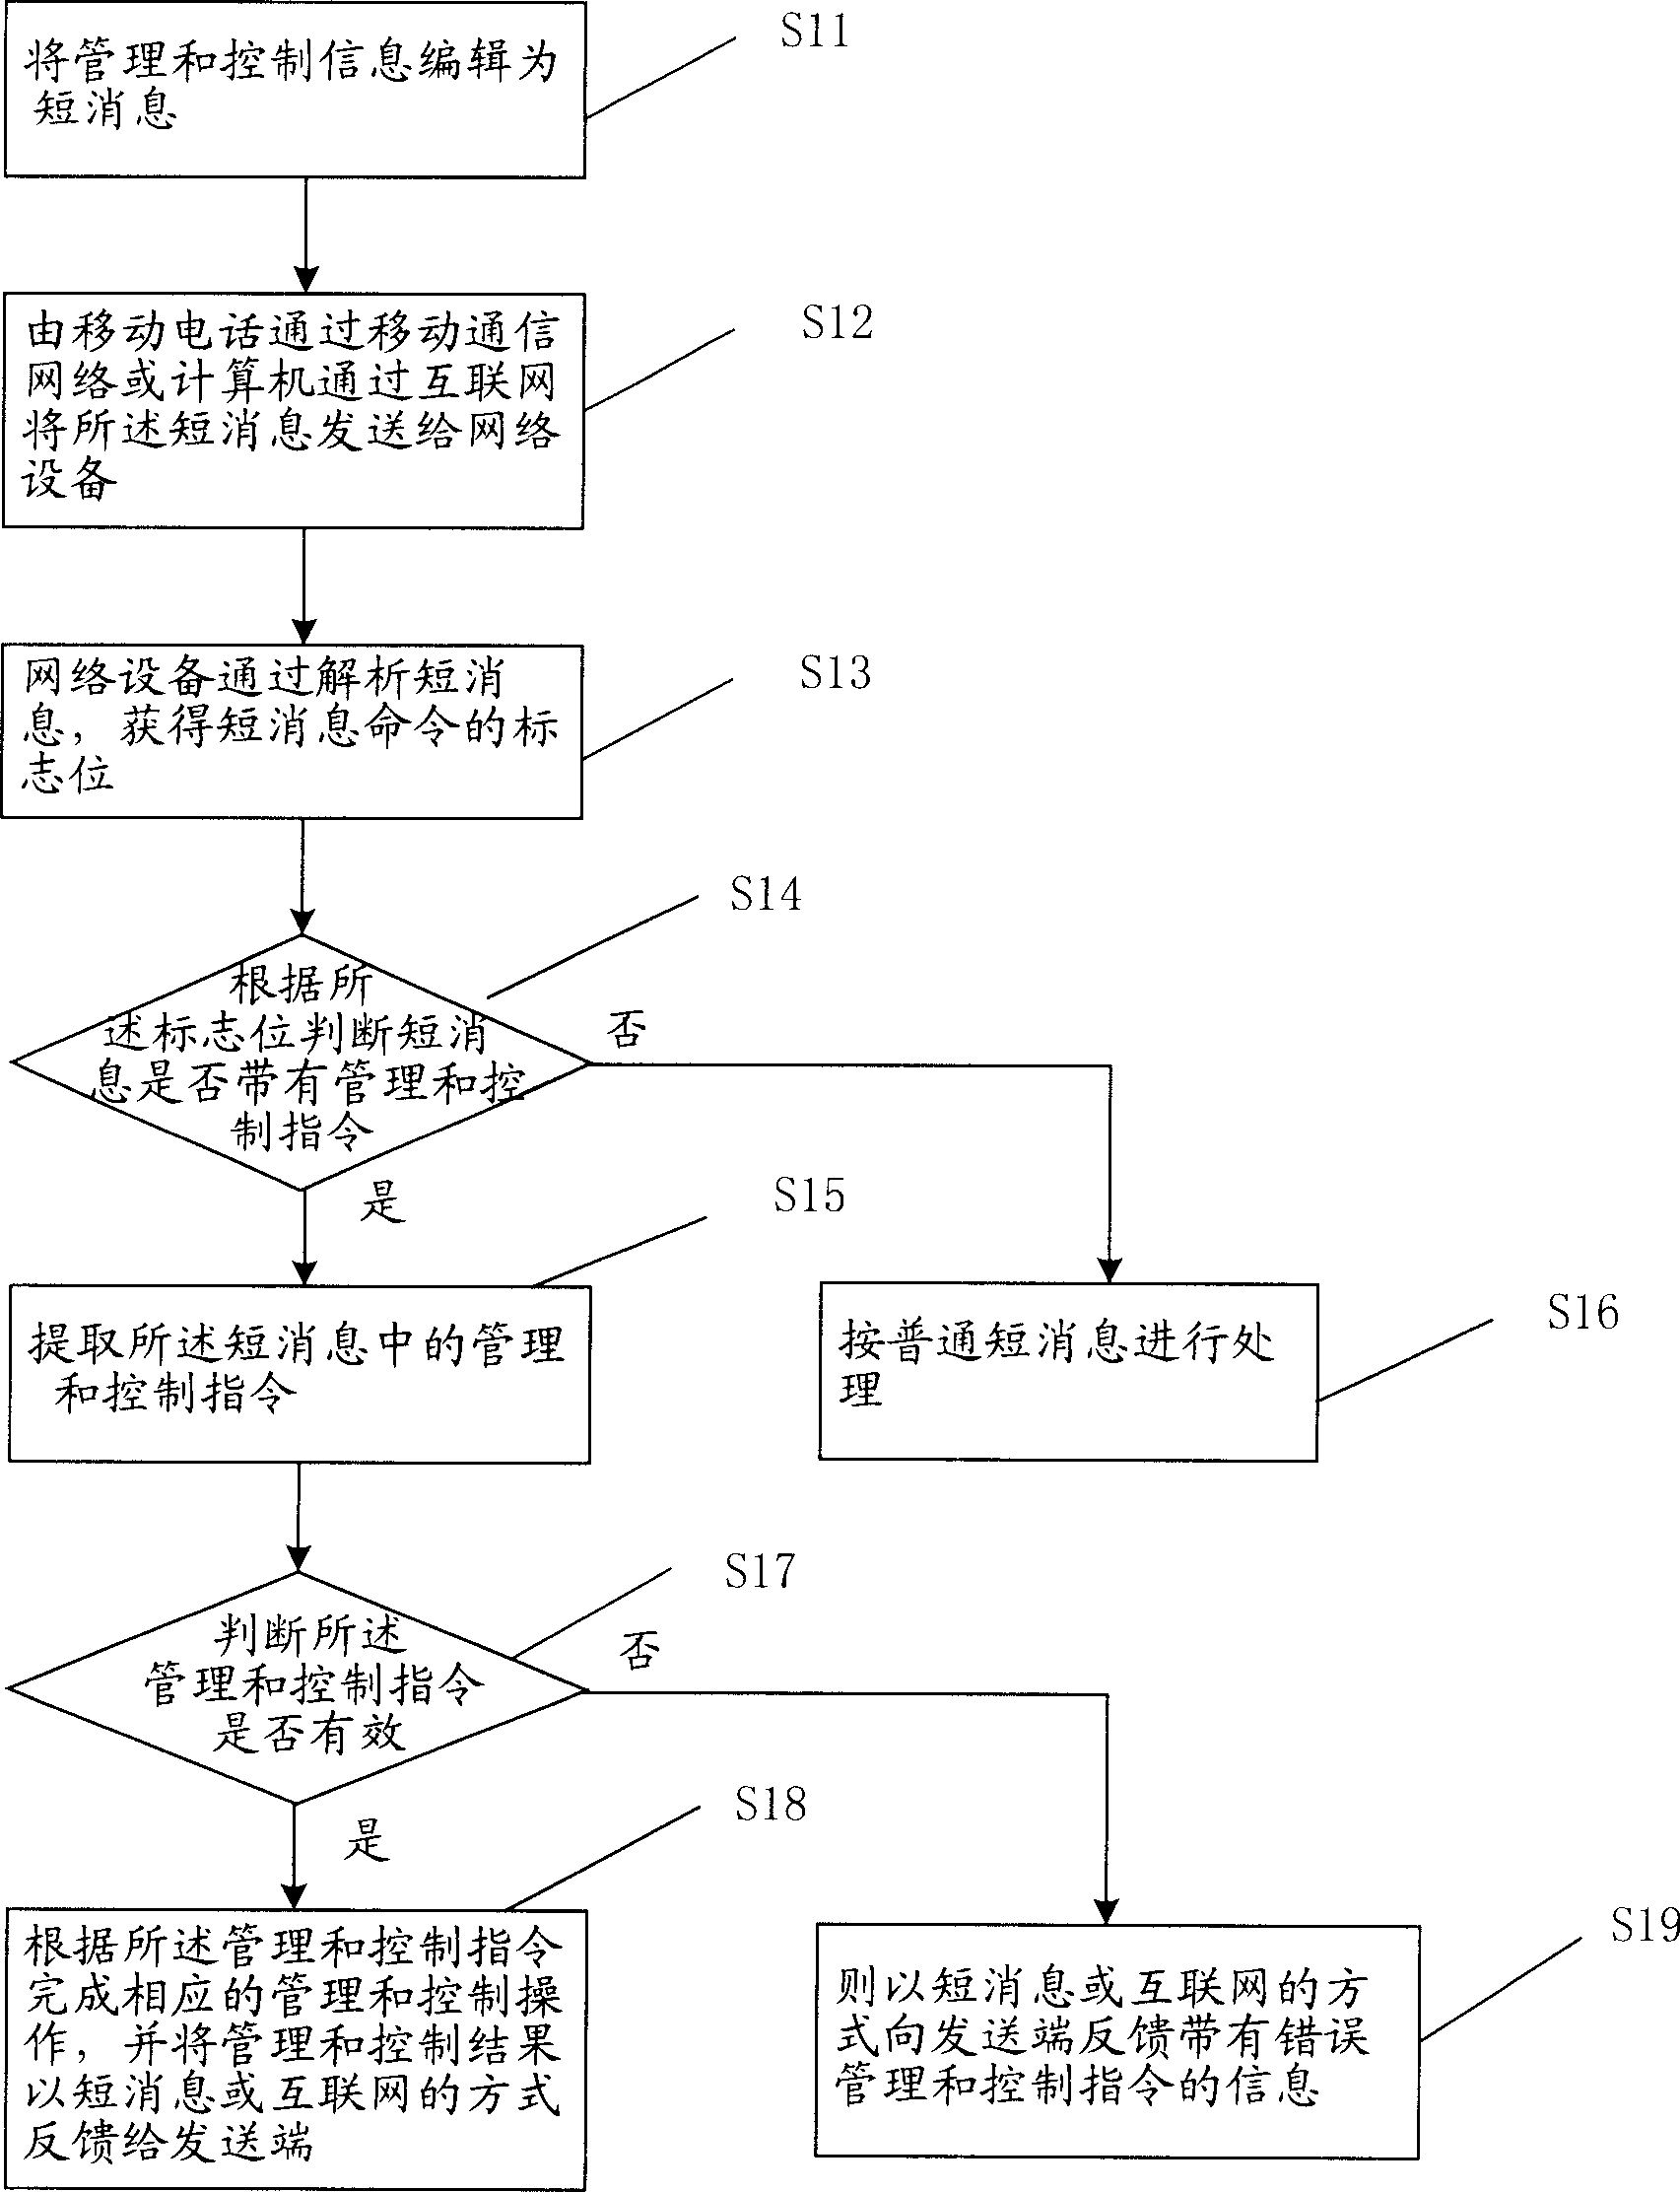 Method and system for managing and controlling network device of supporting wireless mobile communication